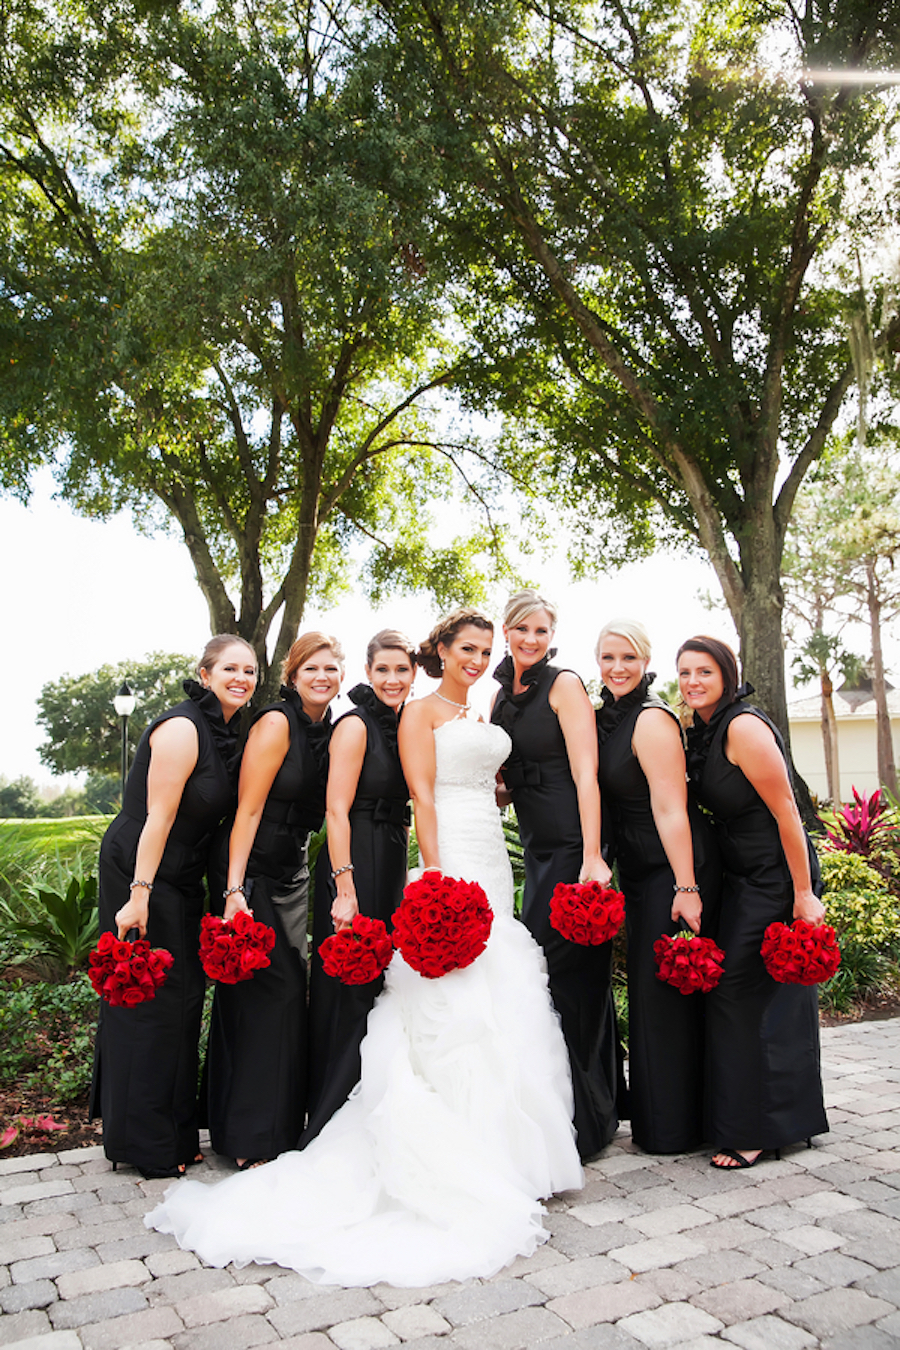 Wedding Party Bridal Portrait| Black Bridesmaid Dresses with Red Rose Bouquets| Photo by Tampa Bay Wedding Photographer Limelight Photography